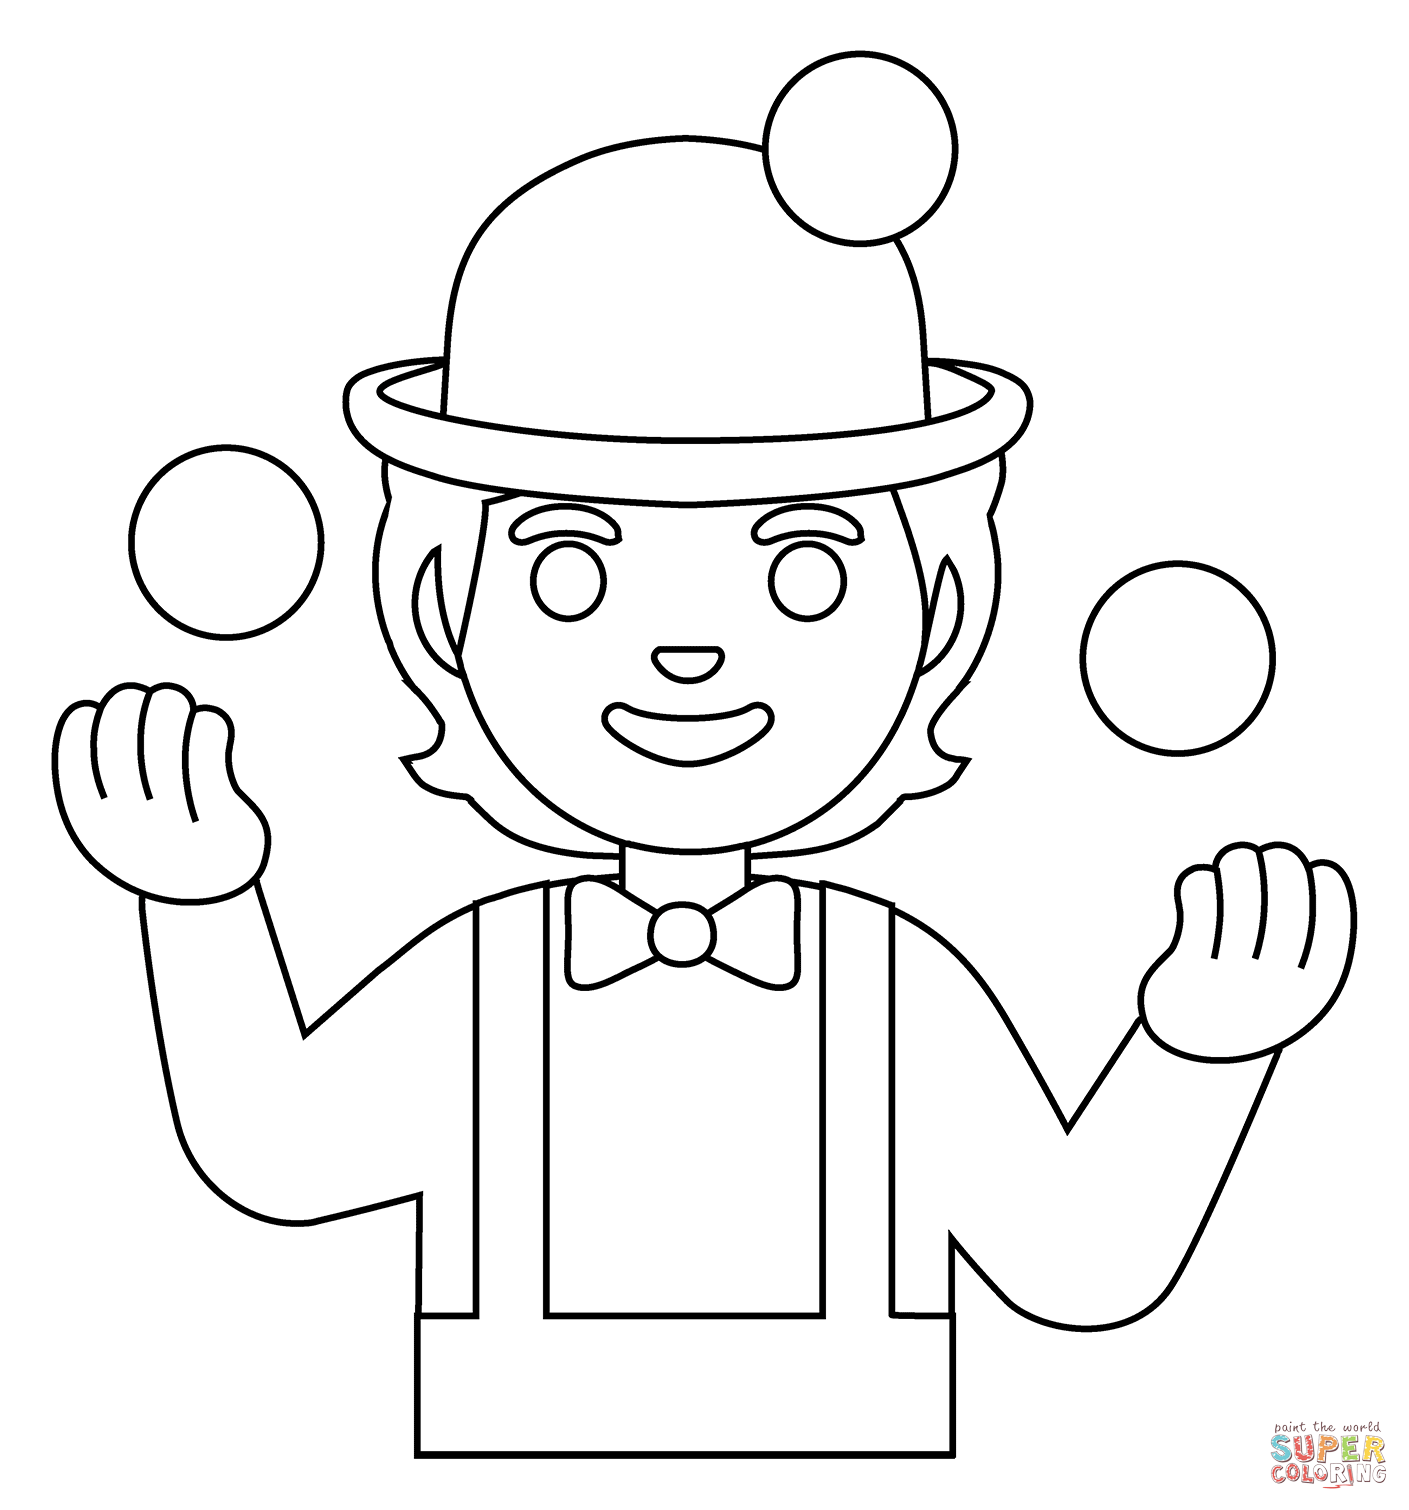 Person juggling emoji coloring page free printable coloring pages